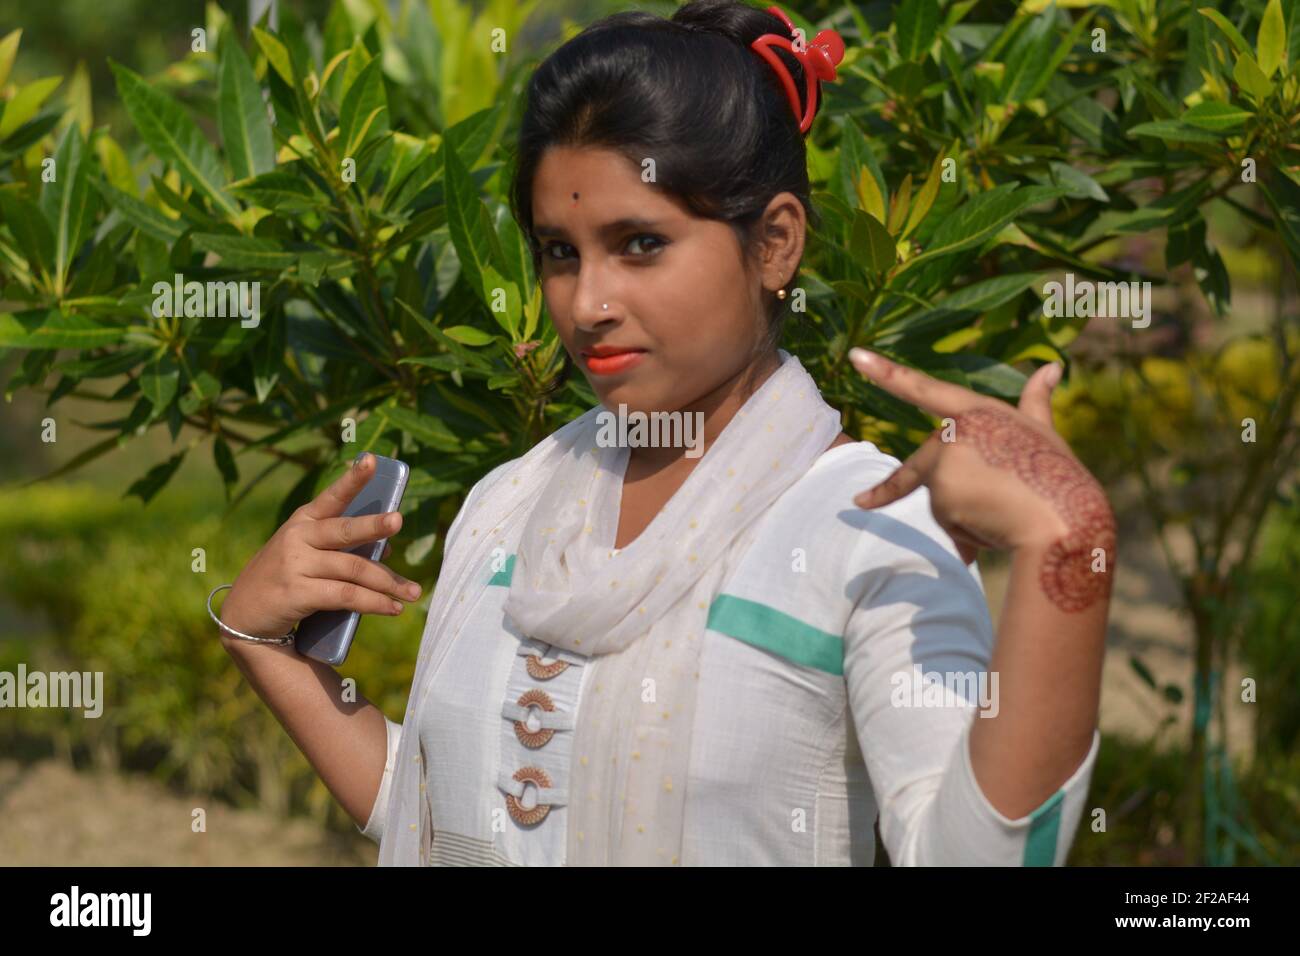 Close up of Indian Bengali teenage girl wearing white salwar, dhupatta, mobile phone on left hand showing victory sign in a park with green leaves Stock Photo